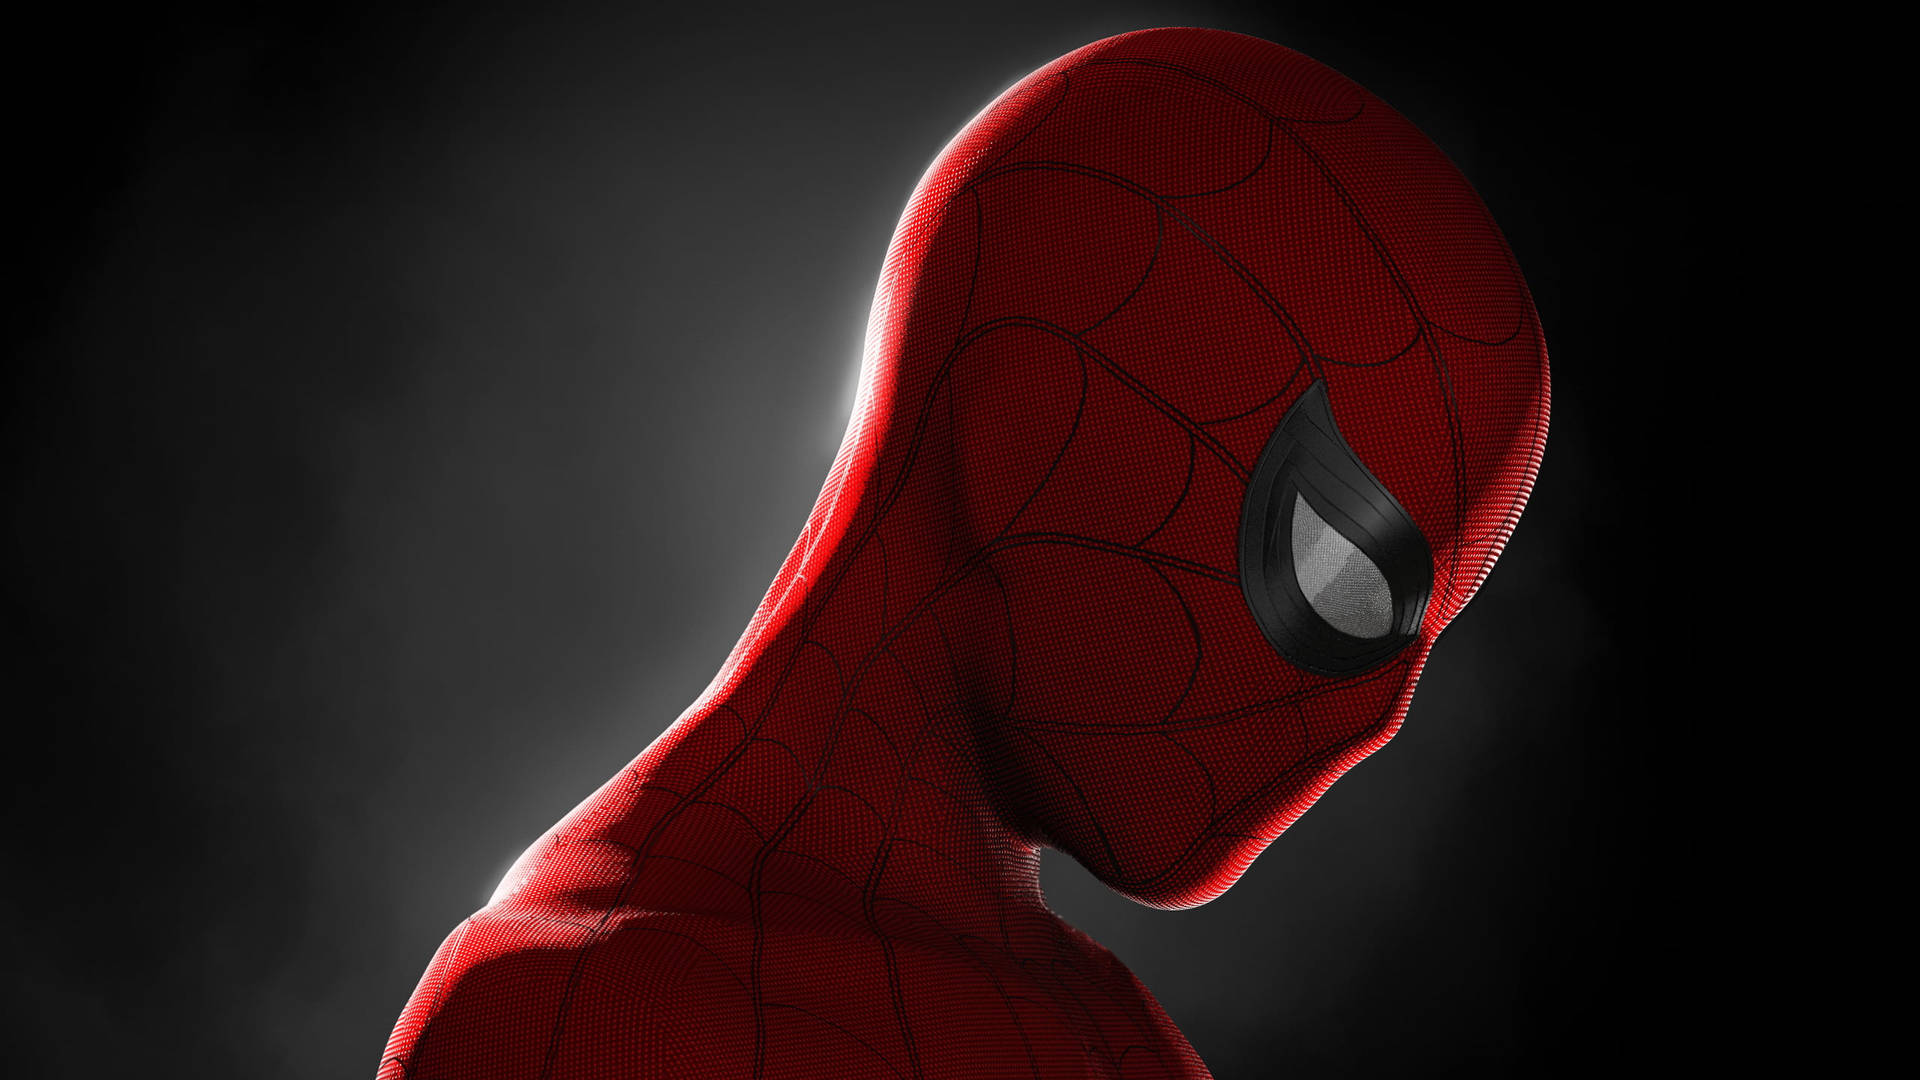 Backlit Spider Man Far From Home 2019 Background